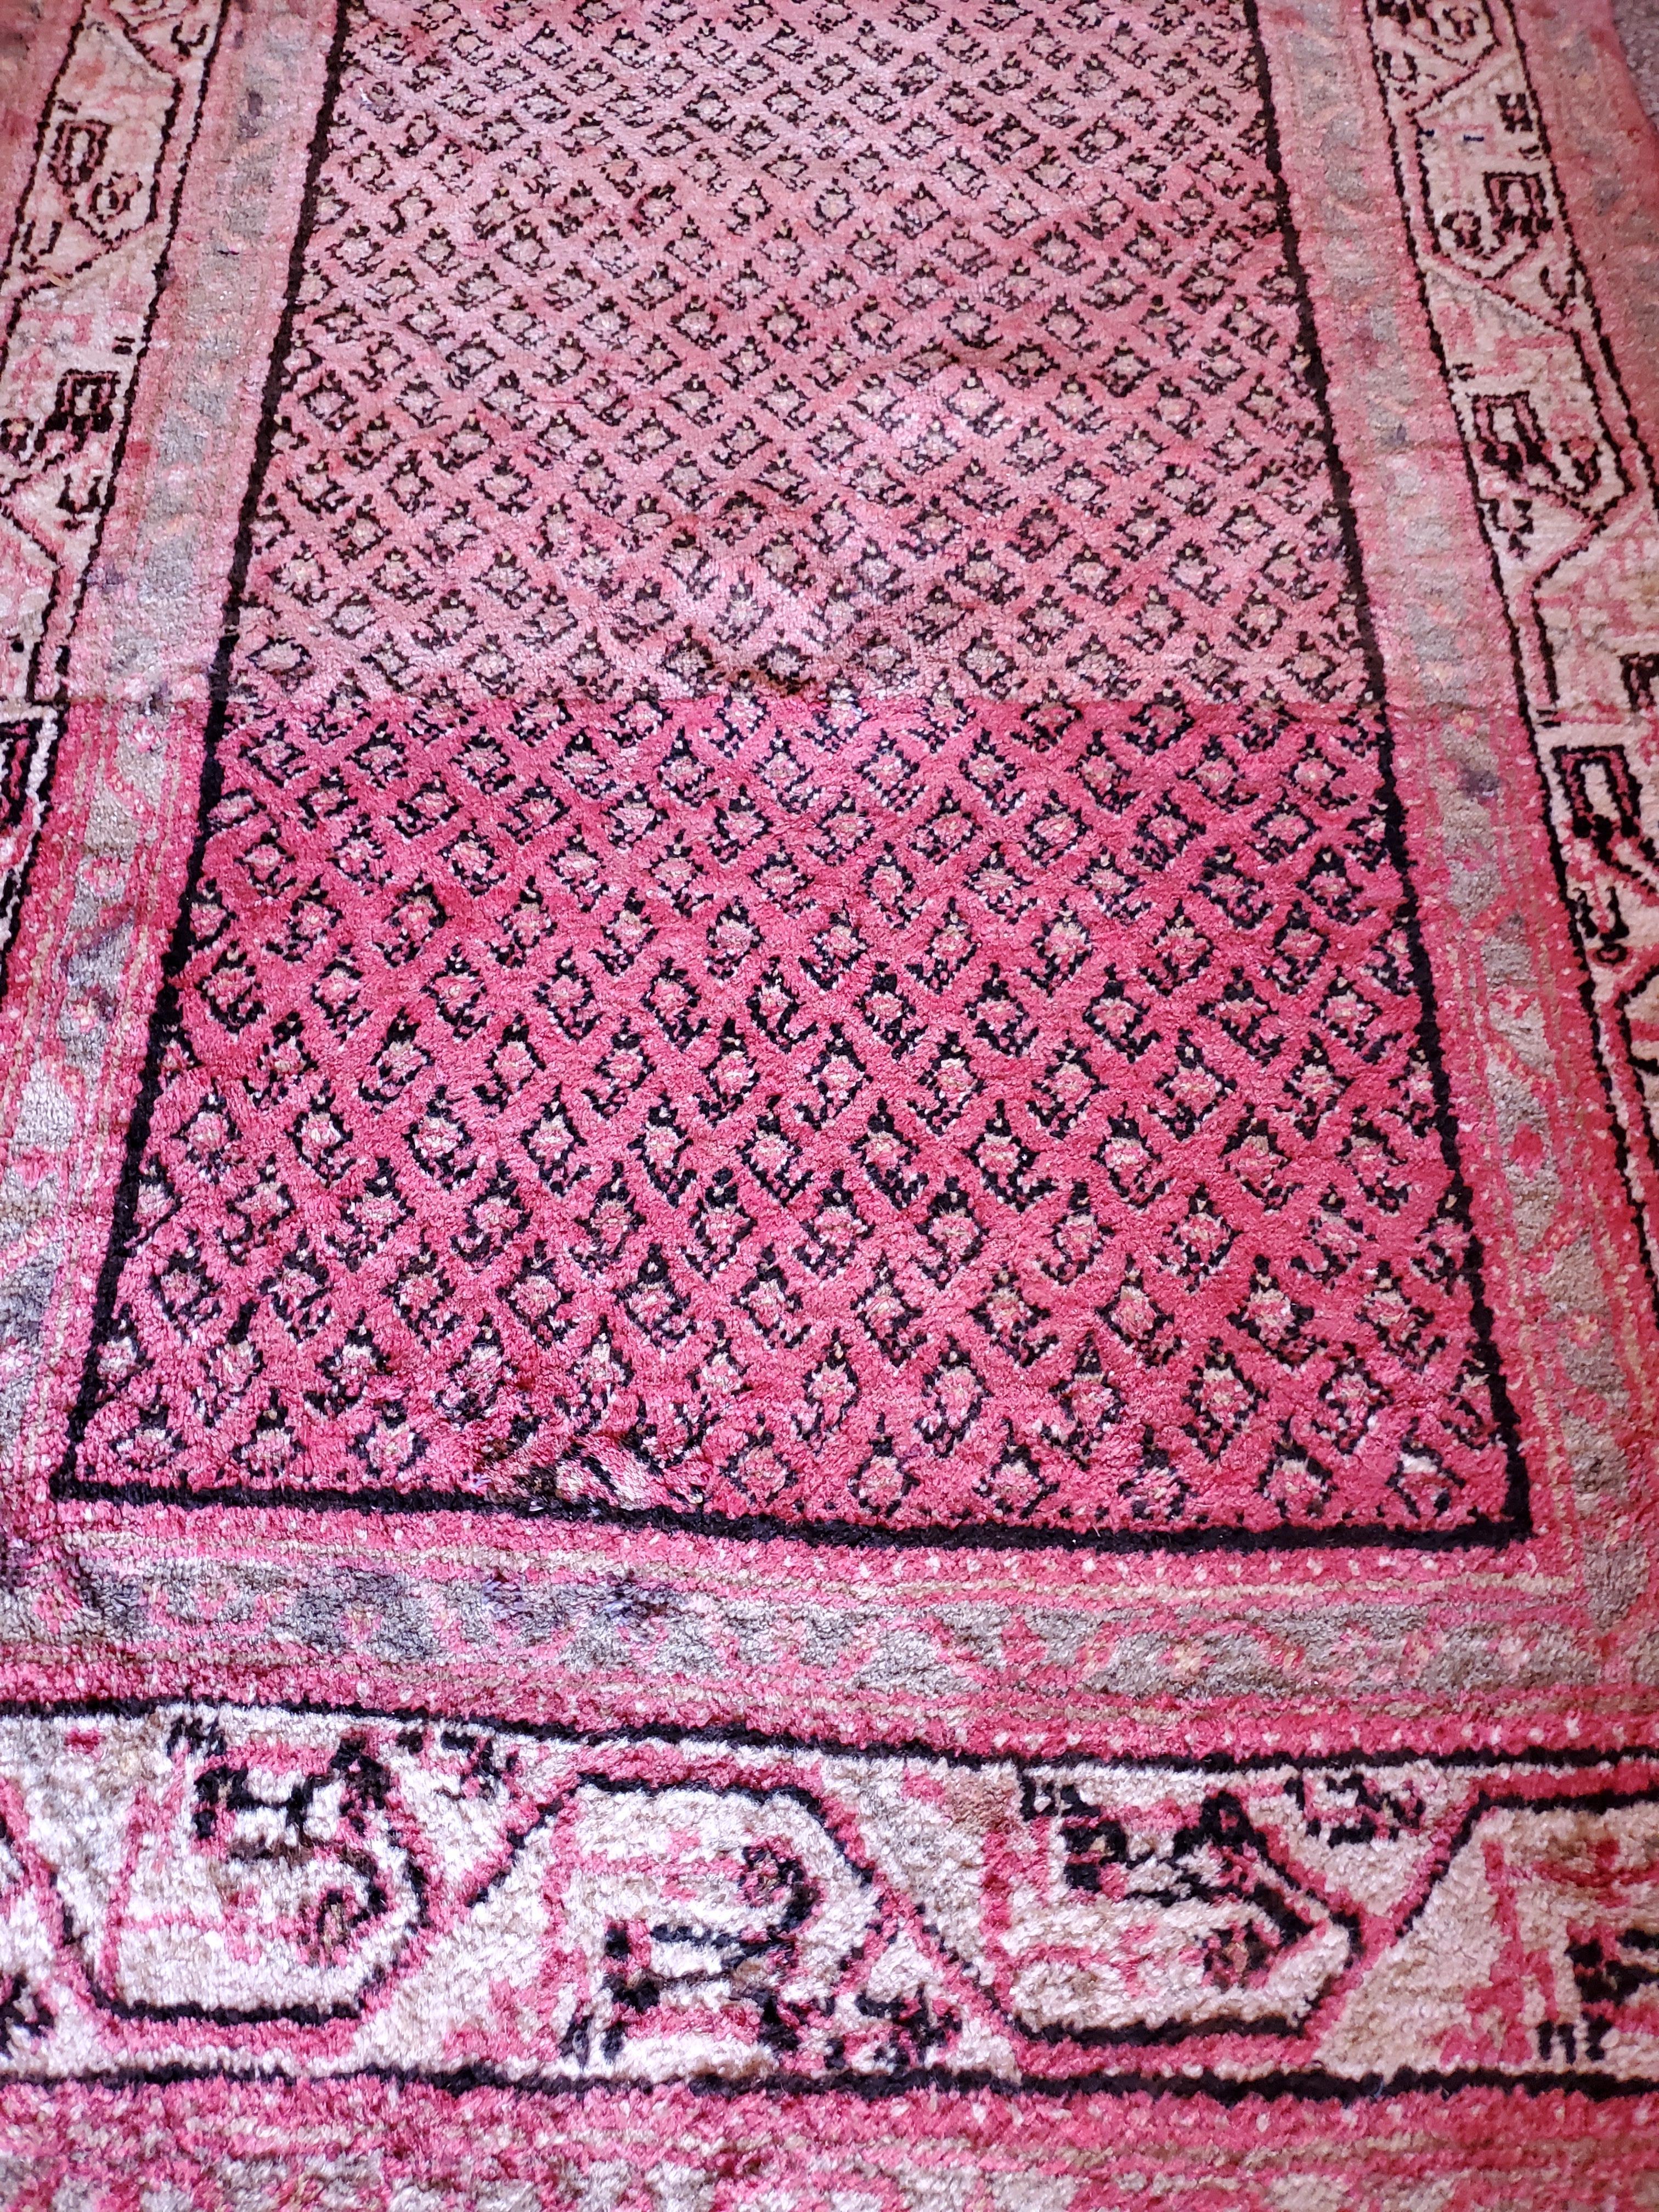 We carry some of the best Afghan / Persian size rugs, in all sizes, and if you are willing to give your space a colorful new look with one of our stunning carpets, we are here to help. This one measures approximately 100